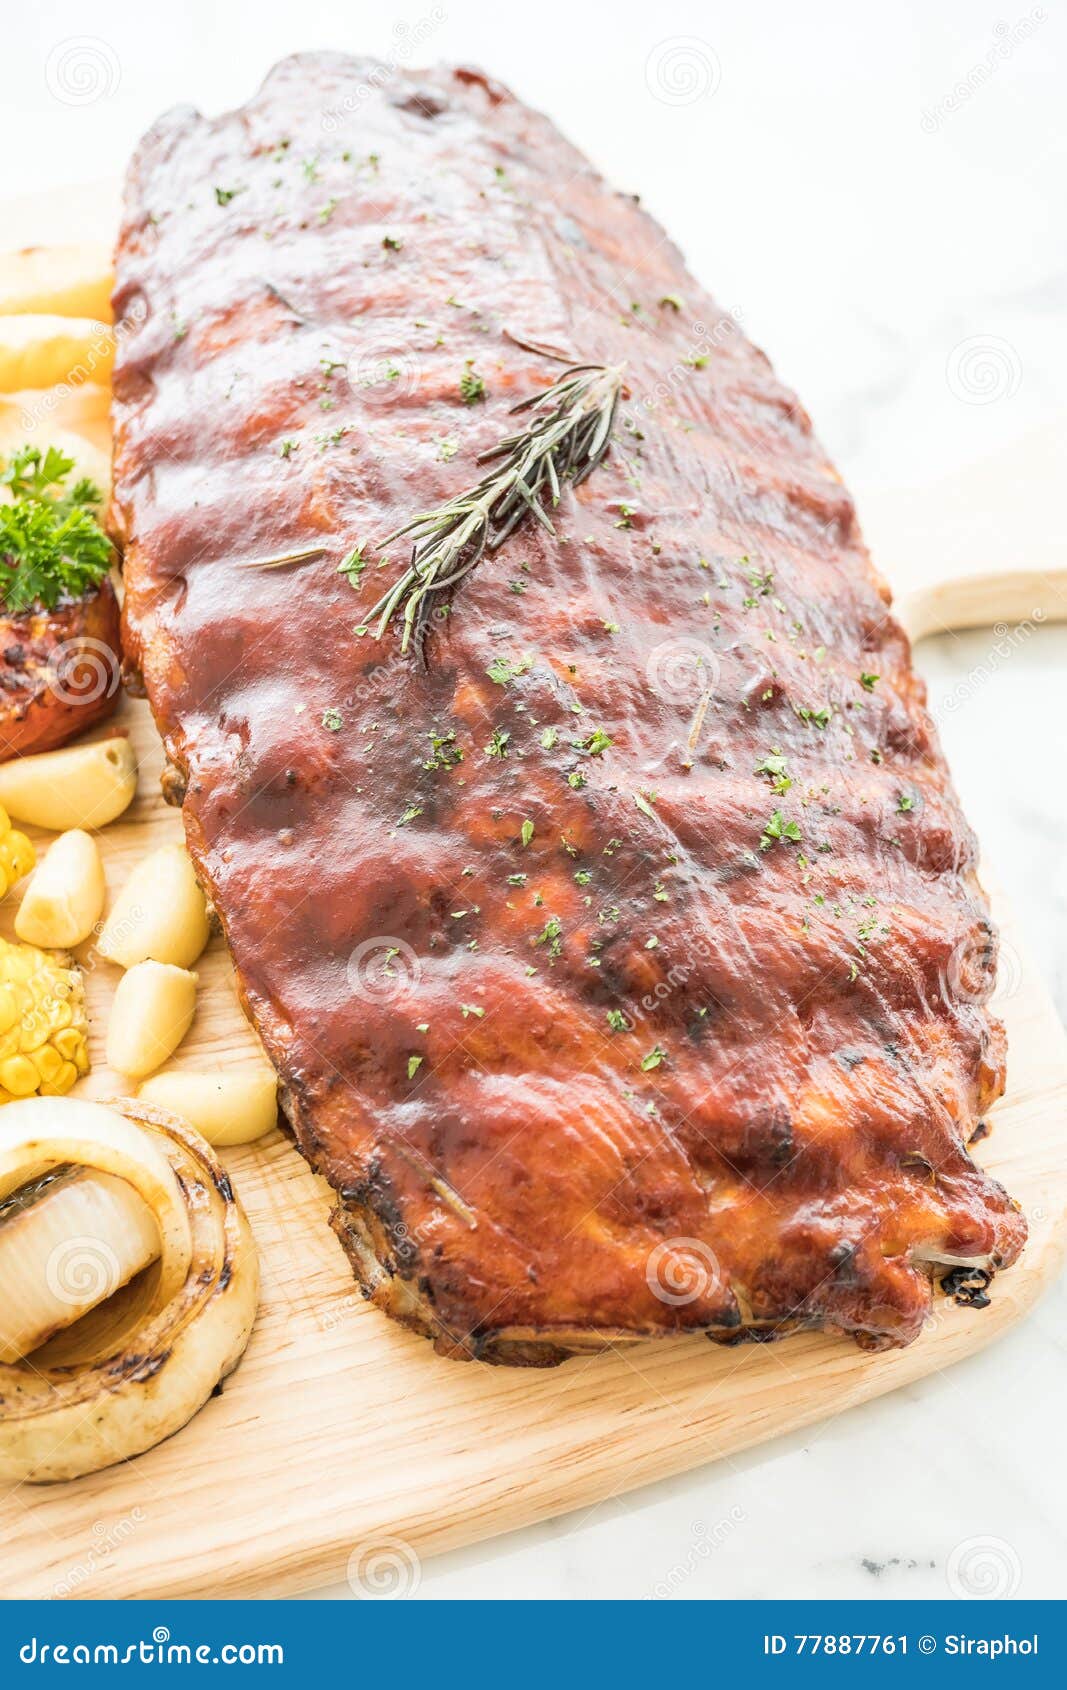 Rib barbecue stock image. Image of sauce, meat, cooked - 77887761